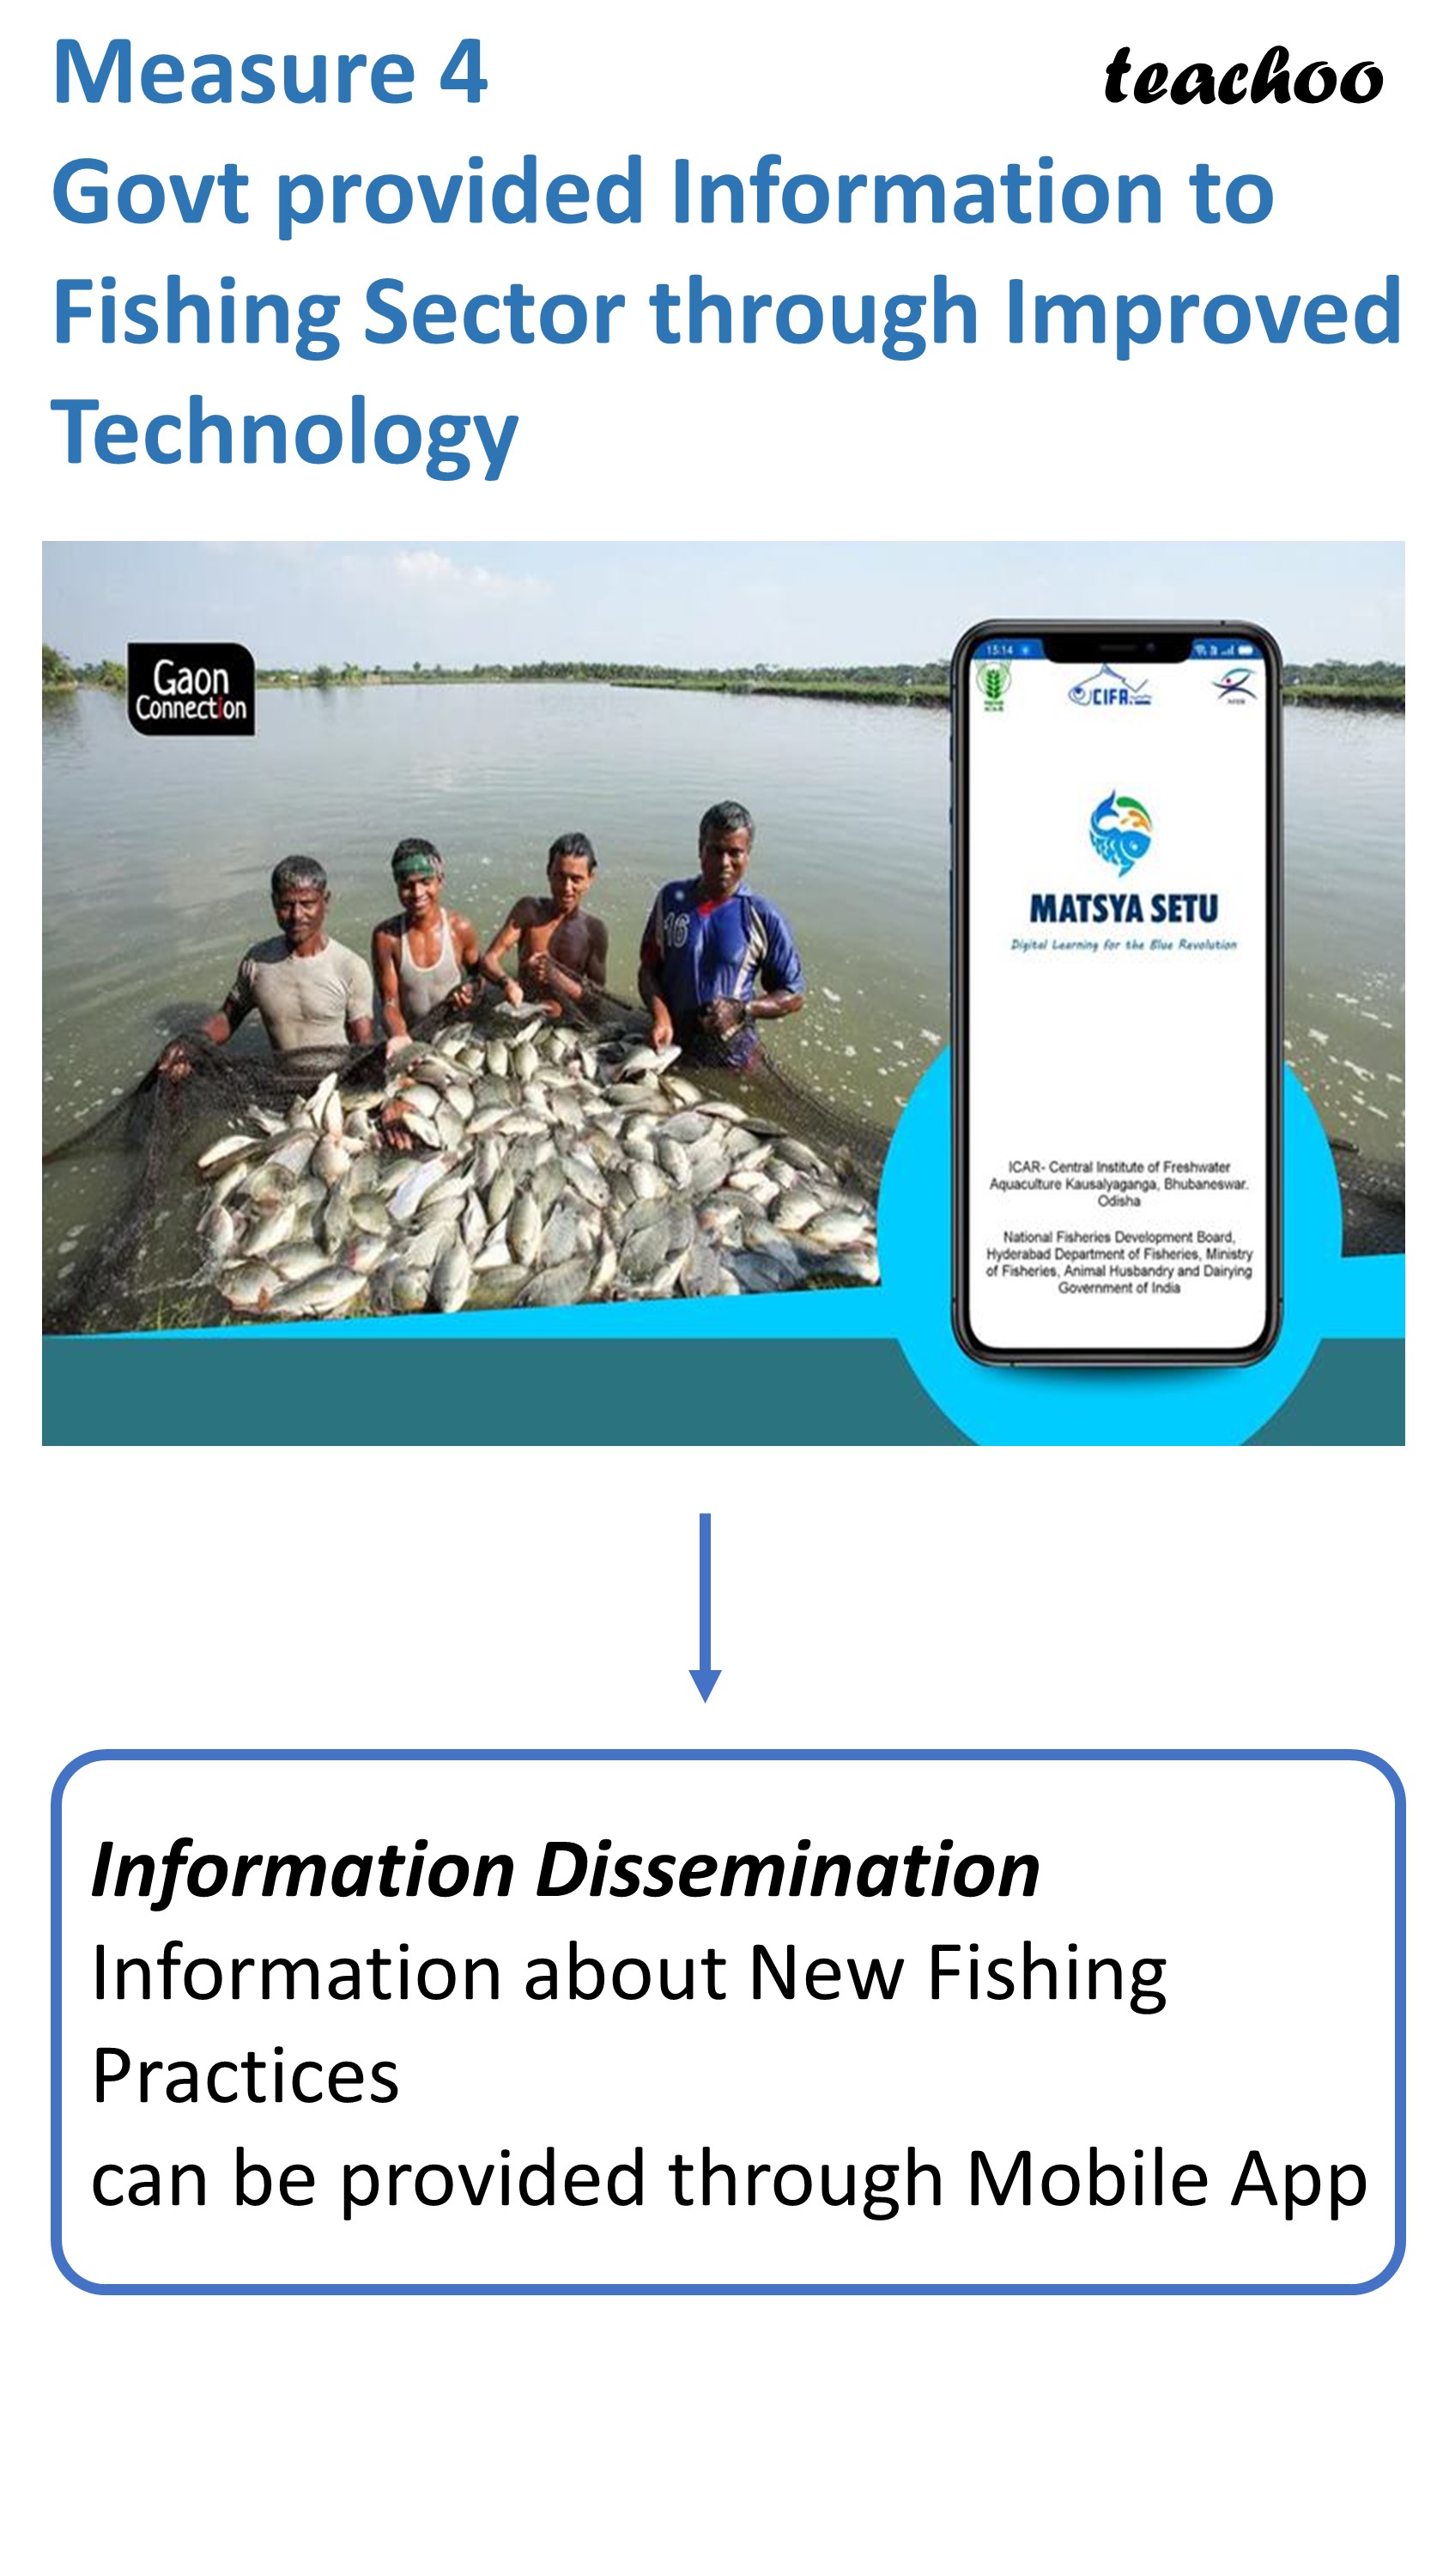 Measure 4 Govt provided Information to Fishing Sector through Improved Technology - Teachoo.JPG